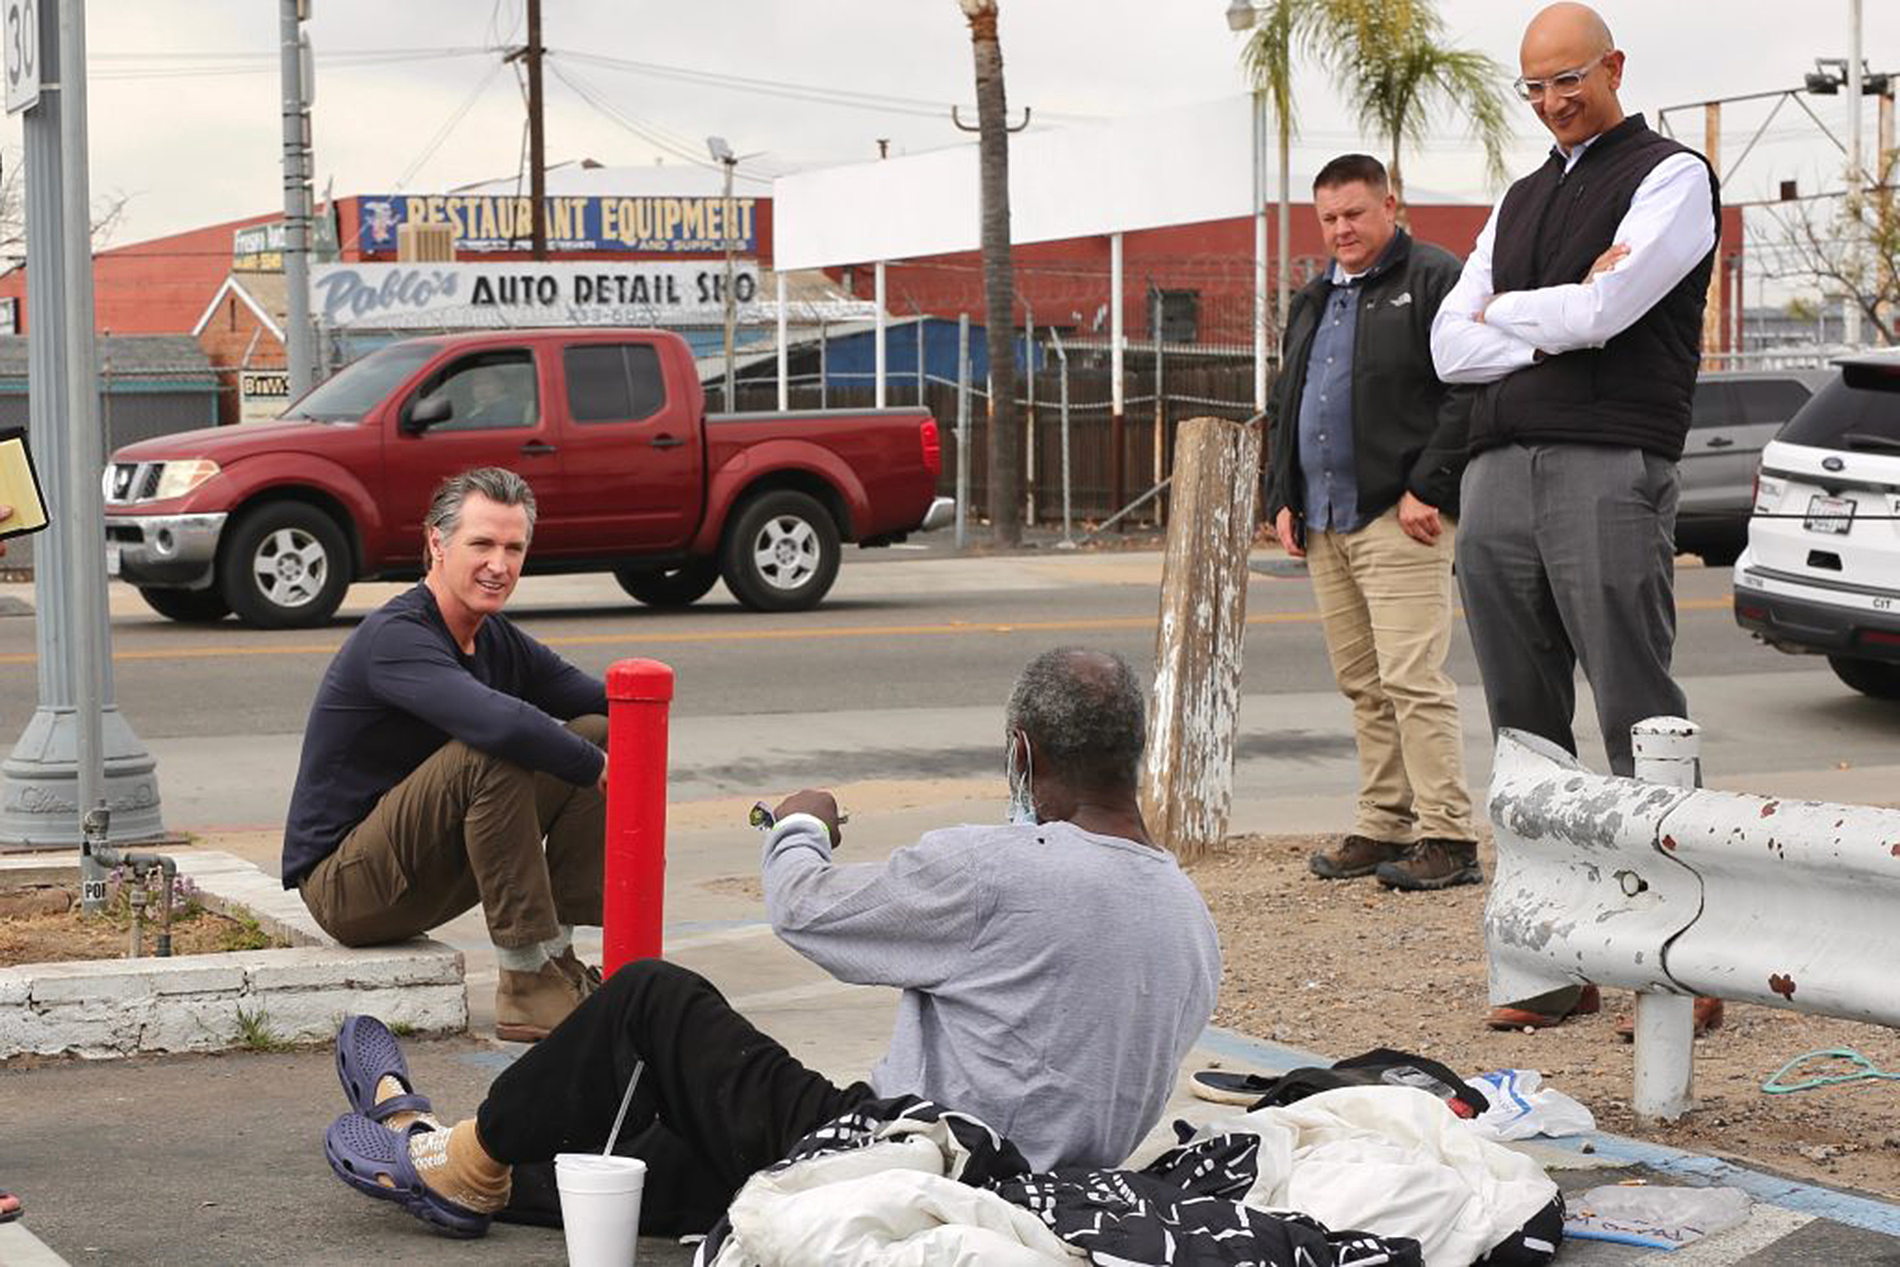 White man sits on sidewalk while speaking to Black man sitting on pavement as two other men stand nearby looking on